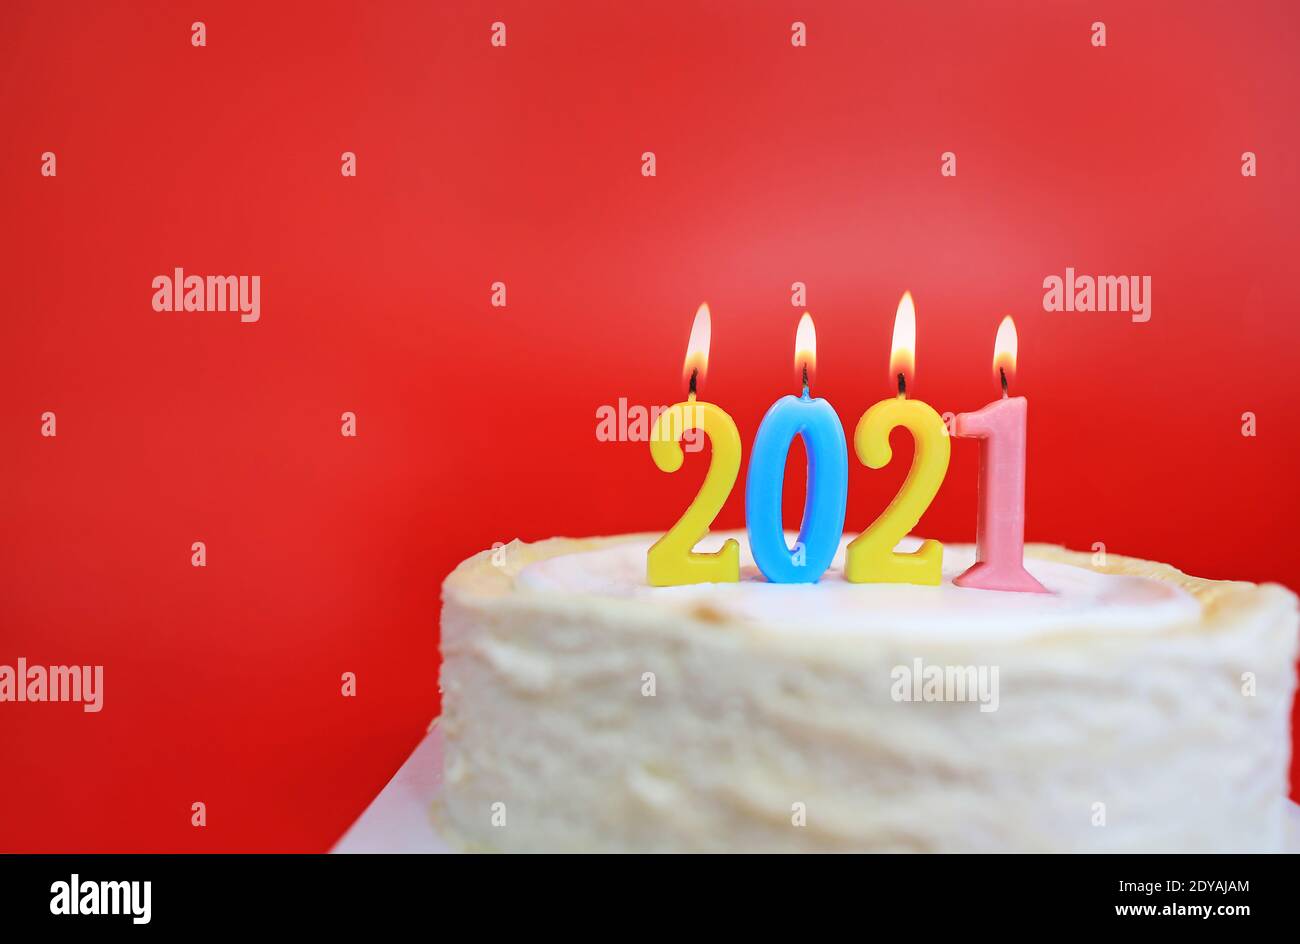 2021 calendar on the cake with red background Stock Photo